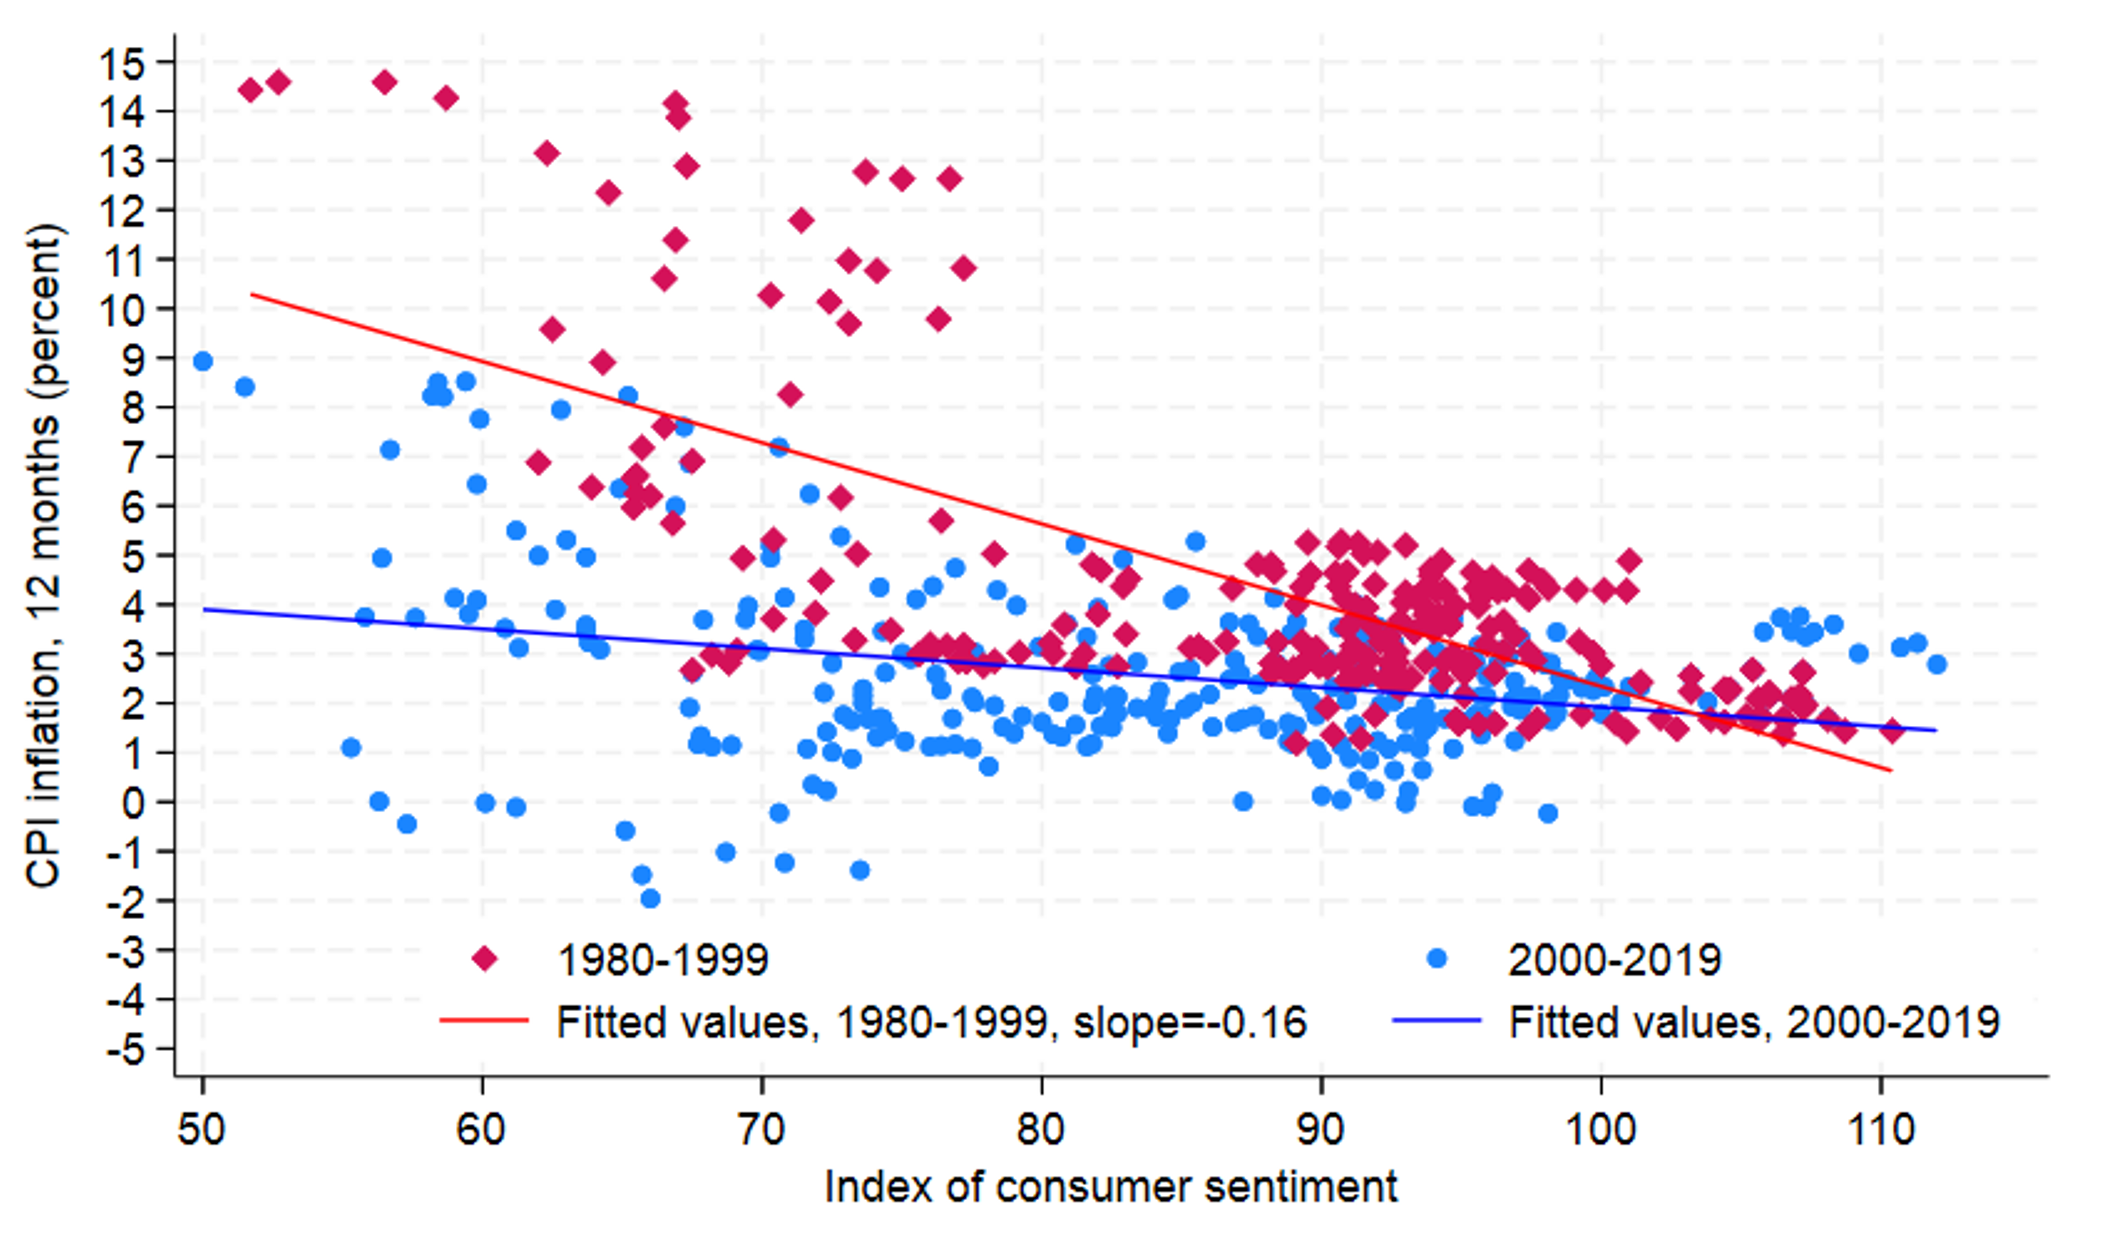 Figure 7. Relationship between sentiment and inflation, 1980-2019. See accessible link for data.